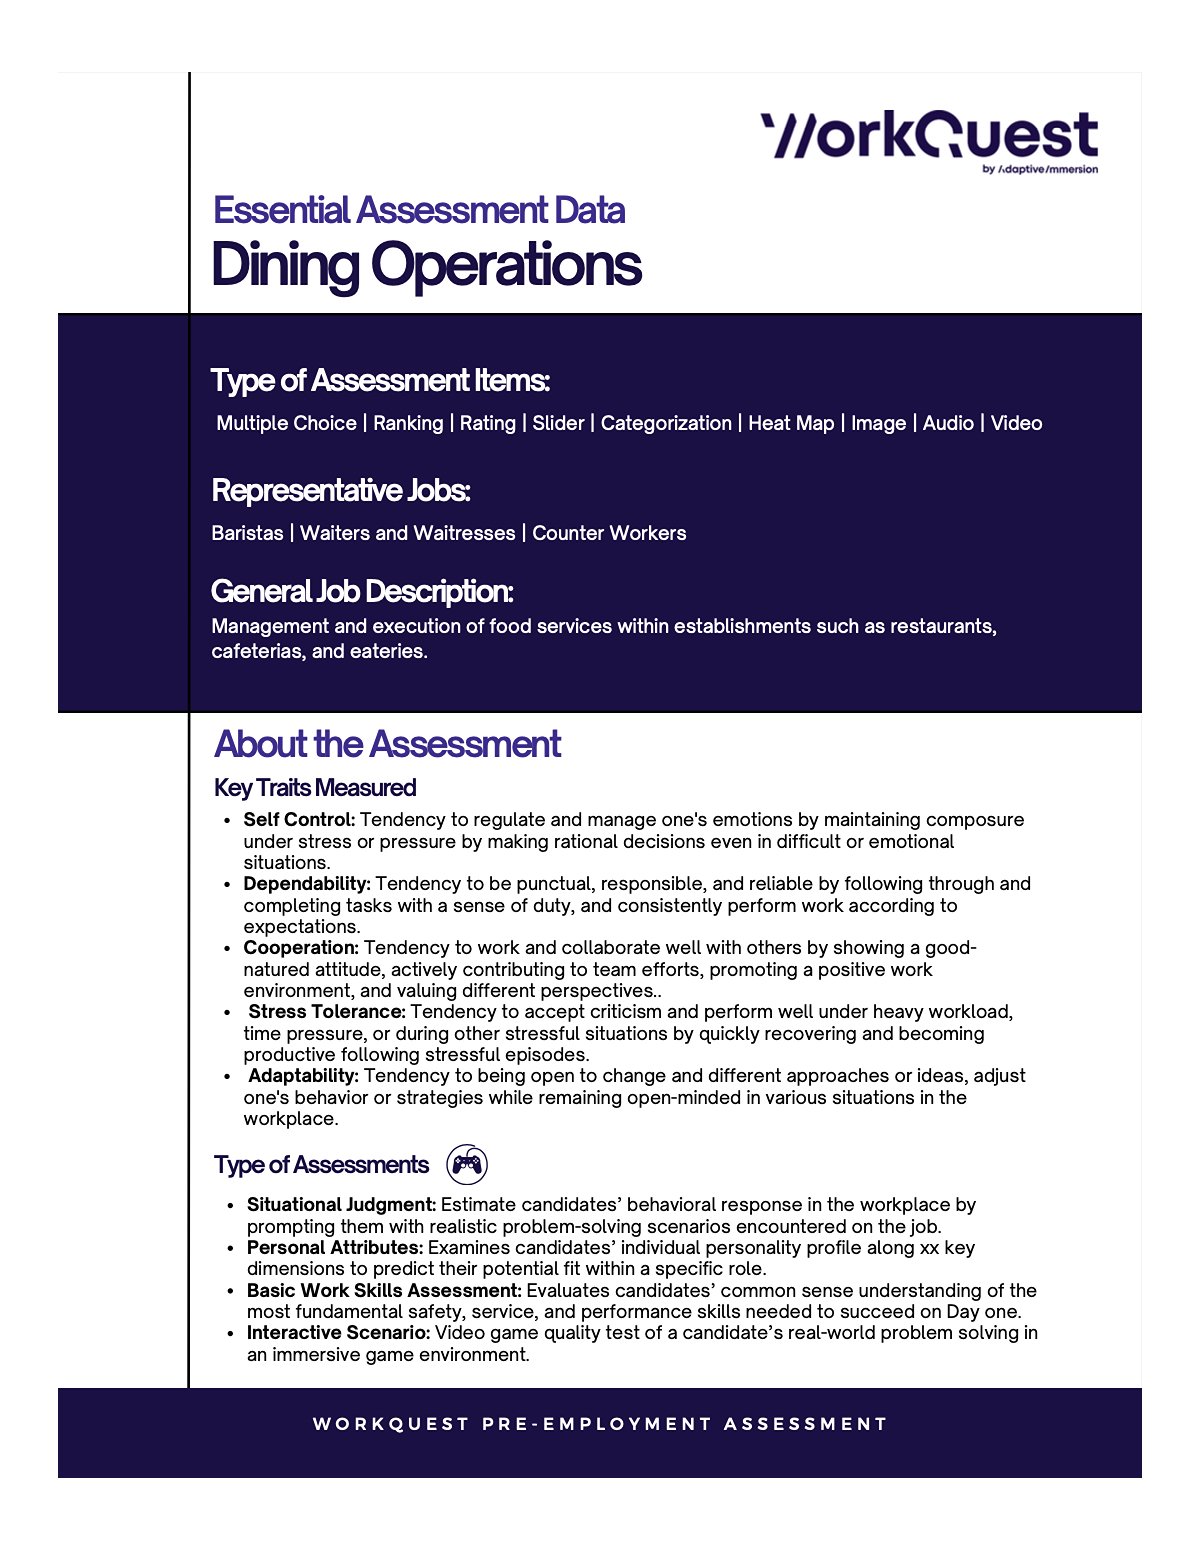 Dining Operations Industry Assessment